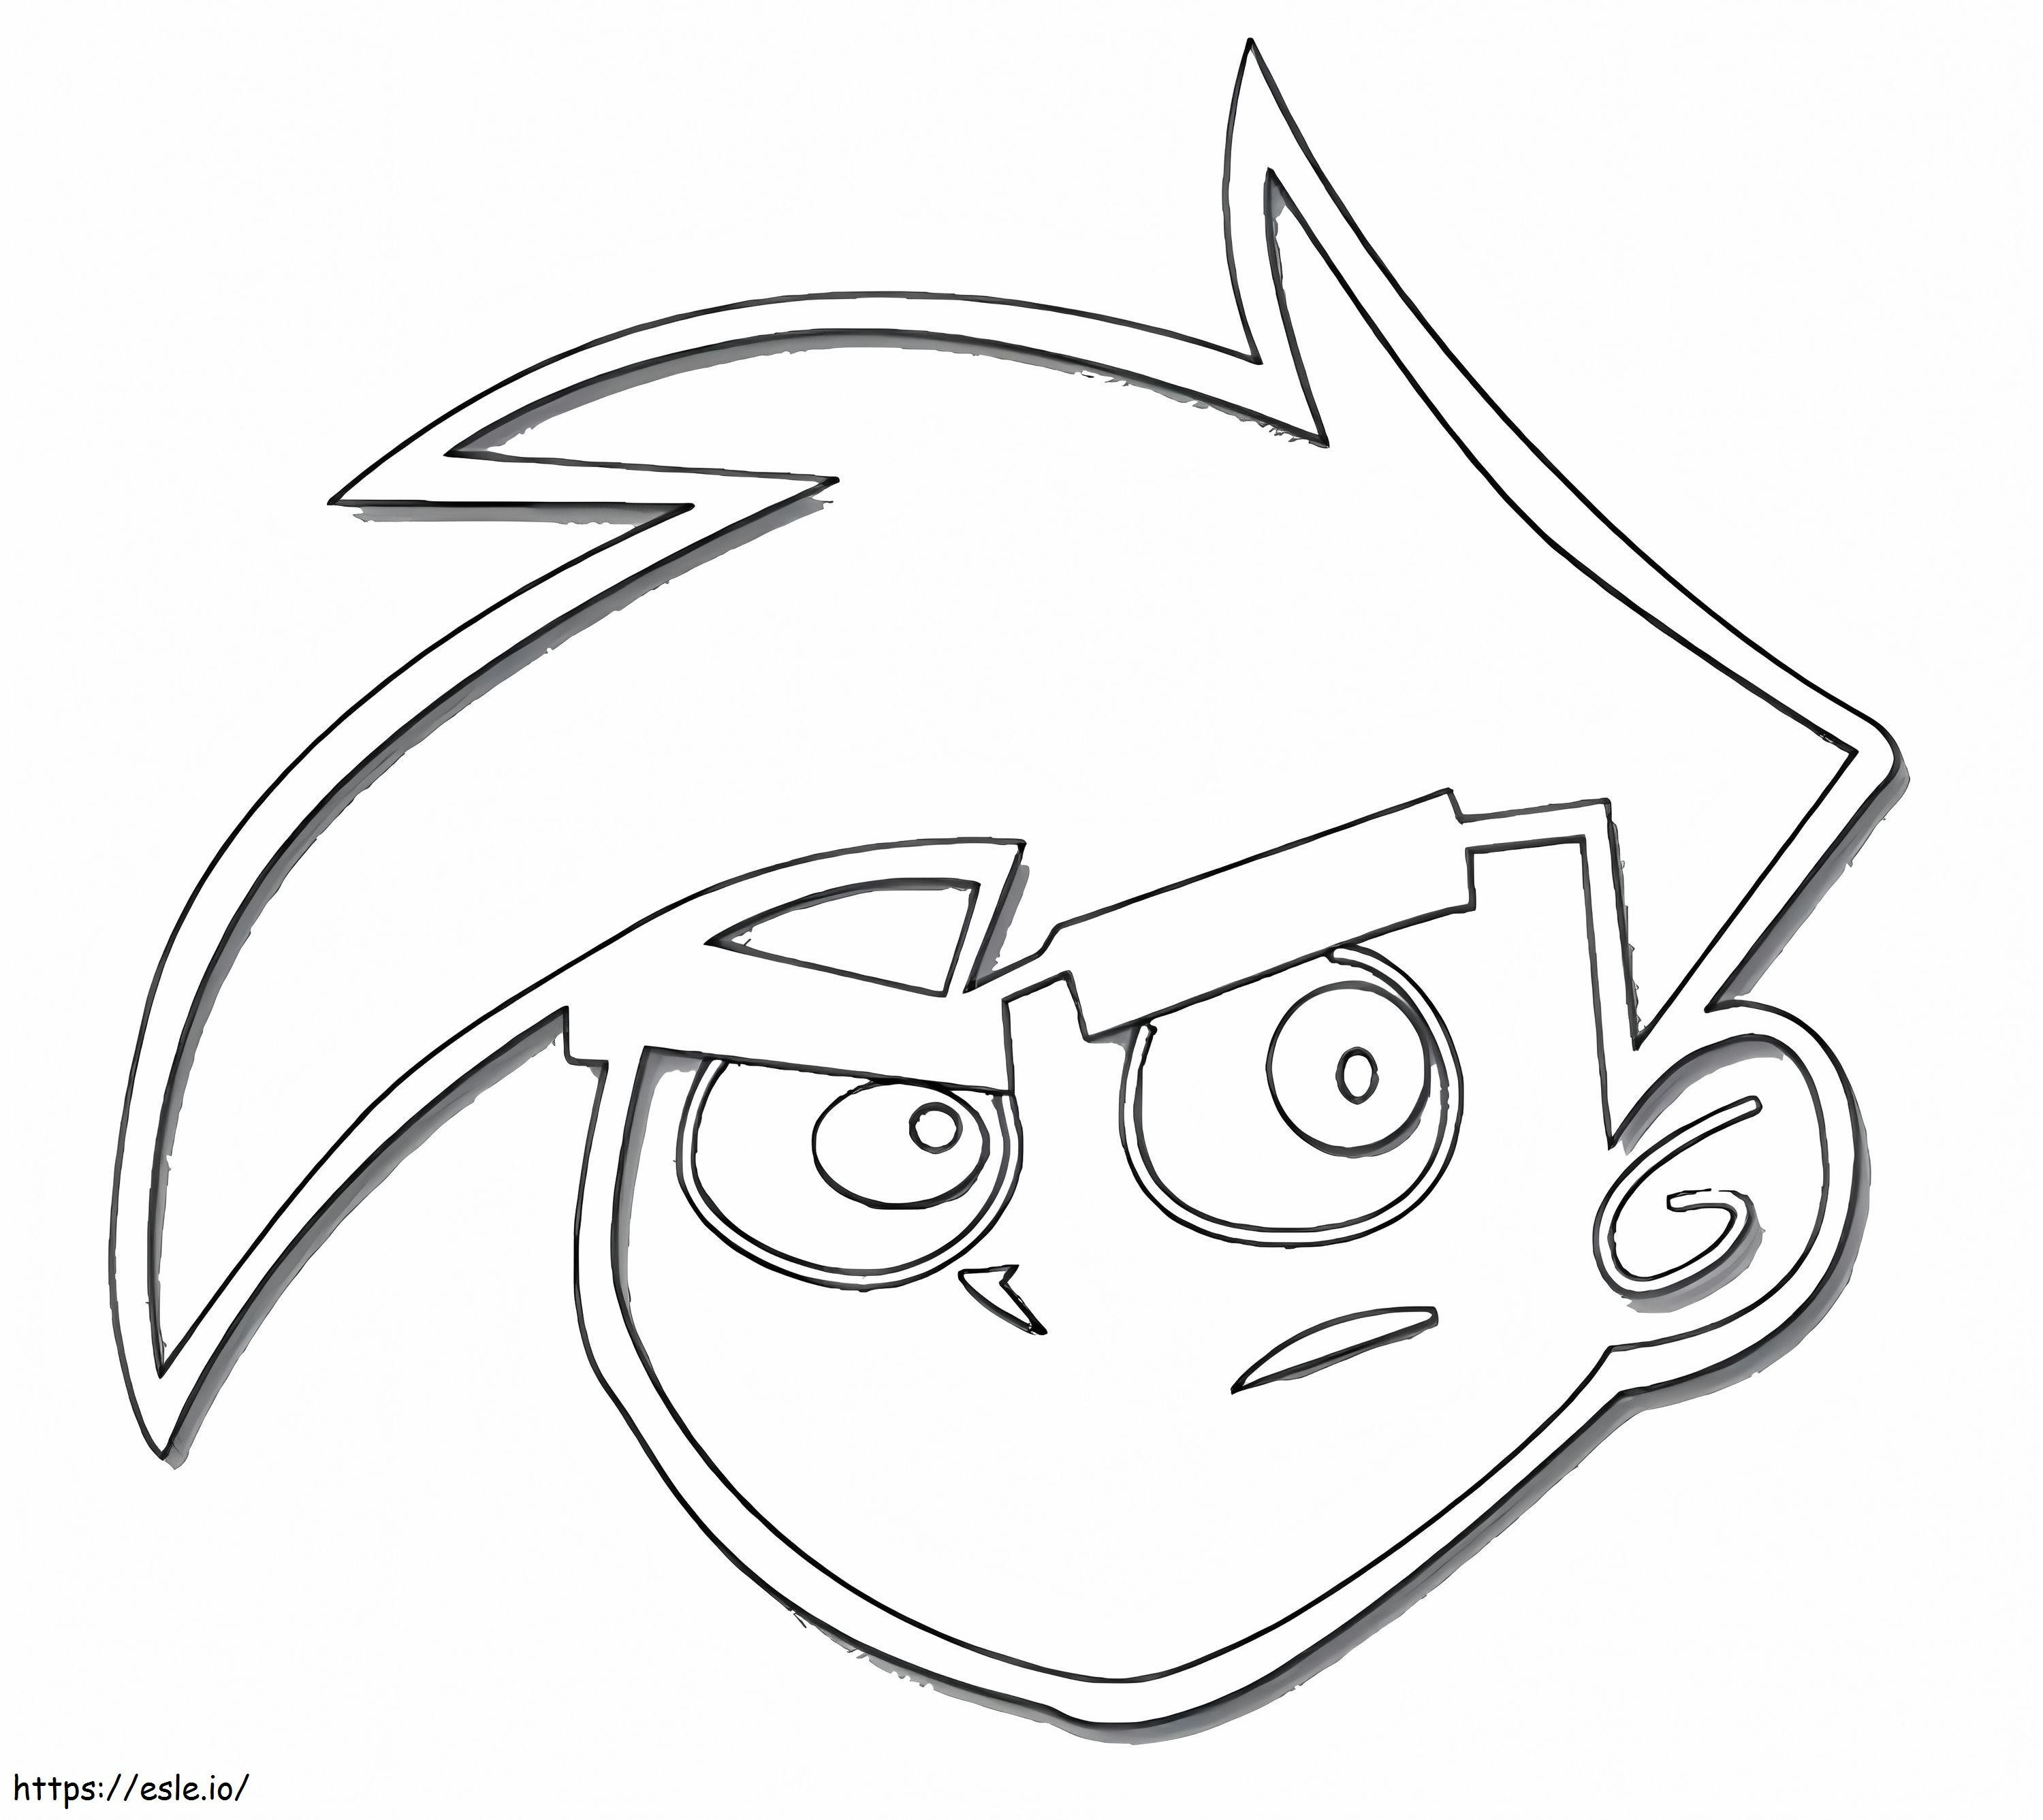 Danny Phantoms Face coloring page